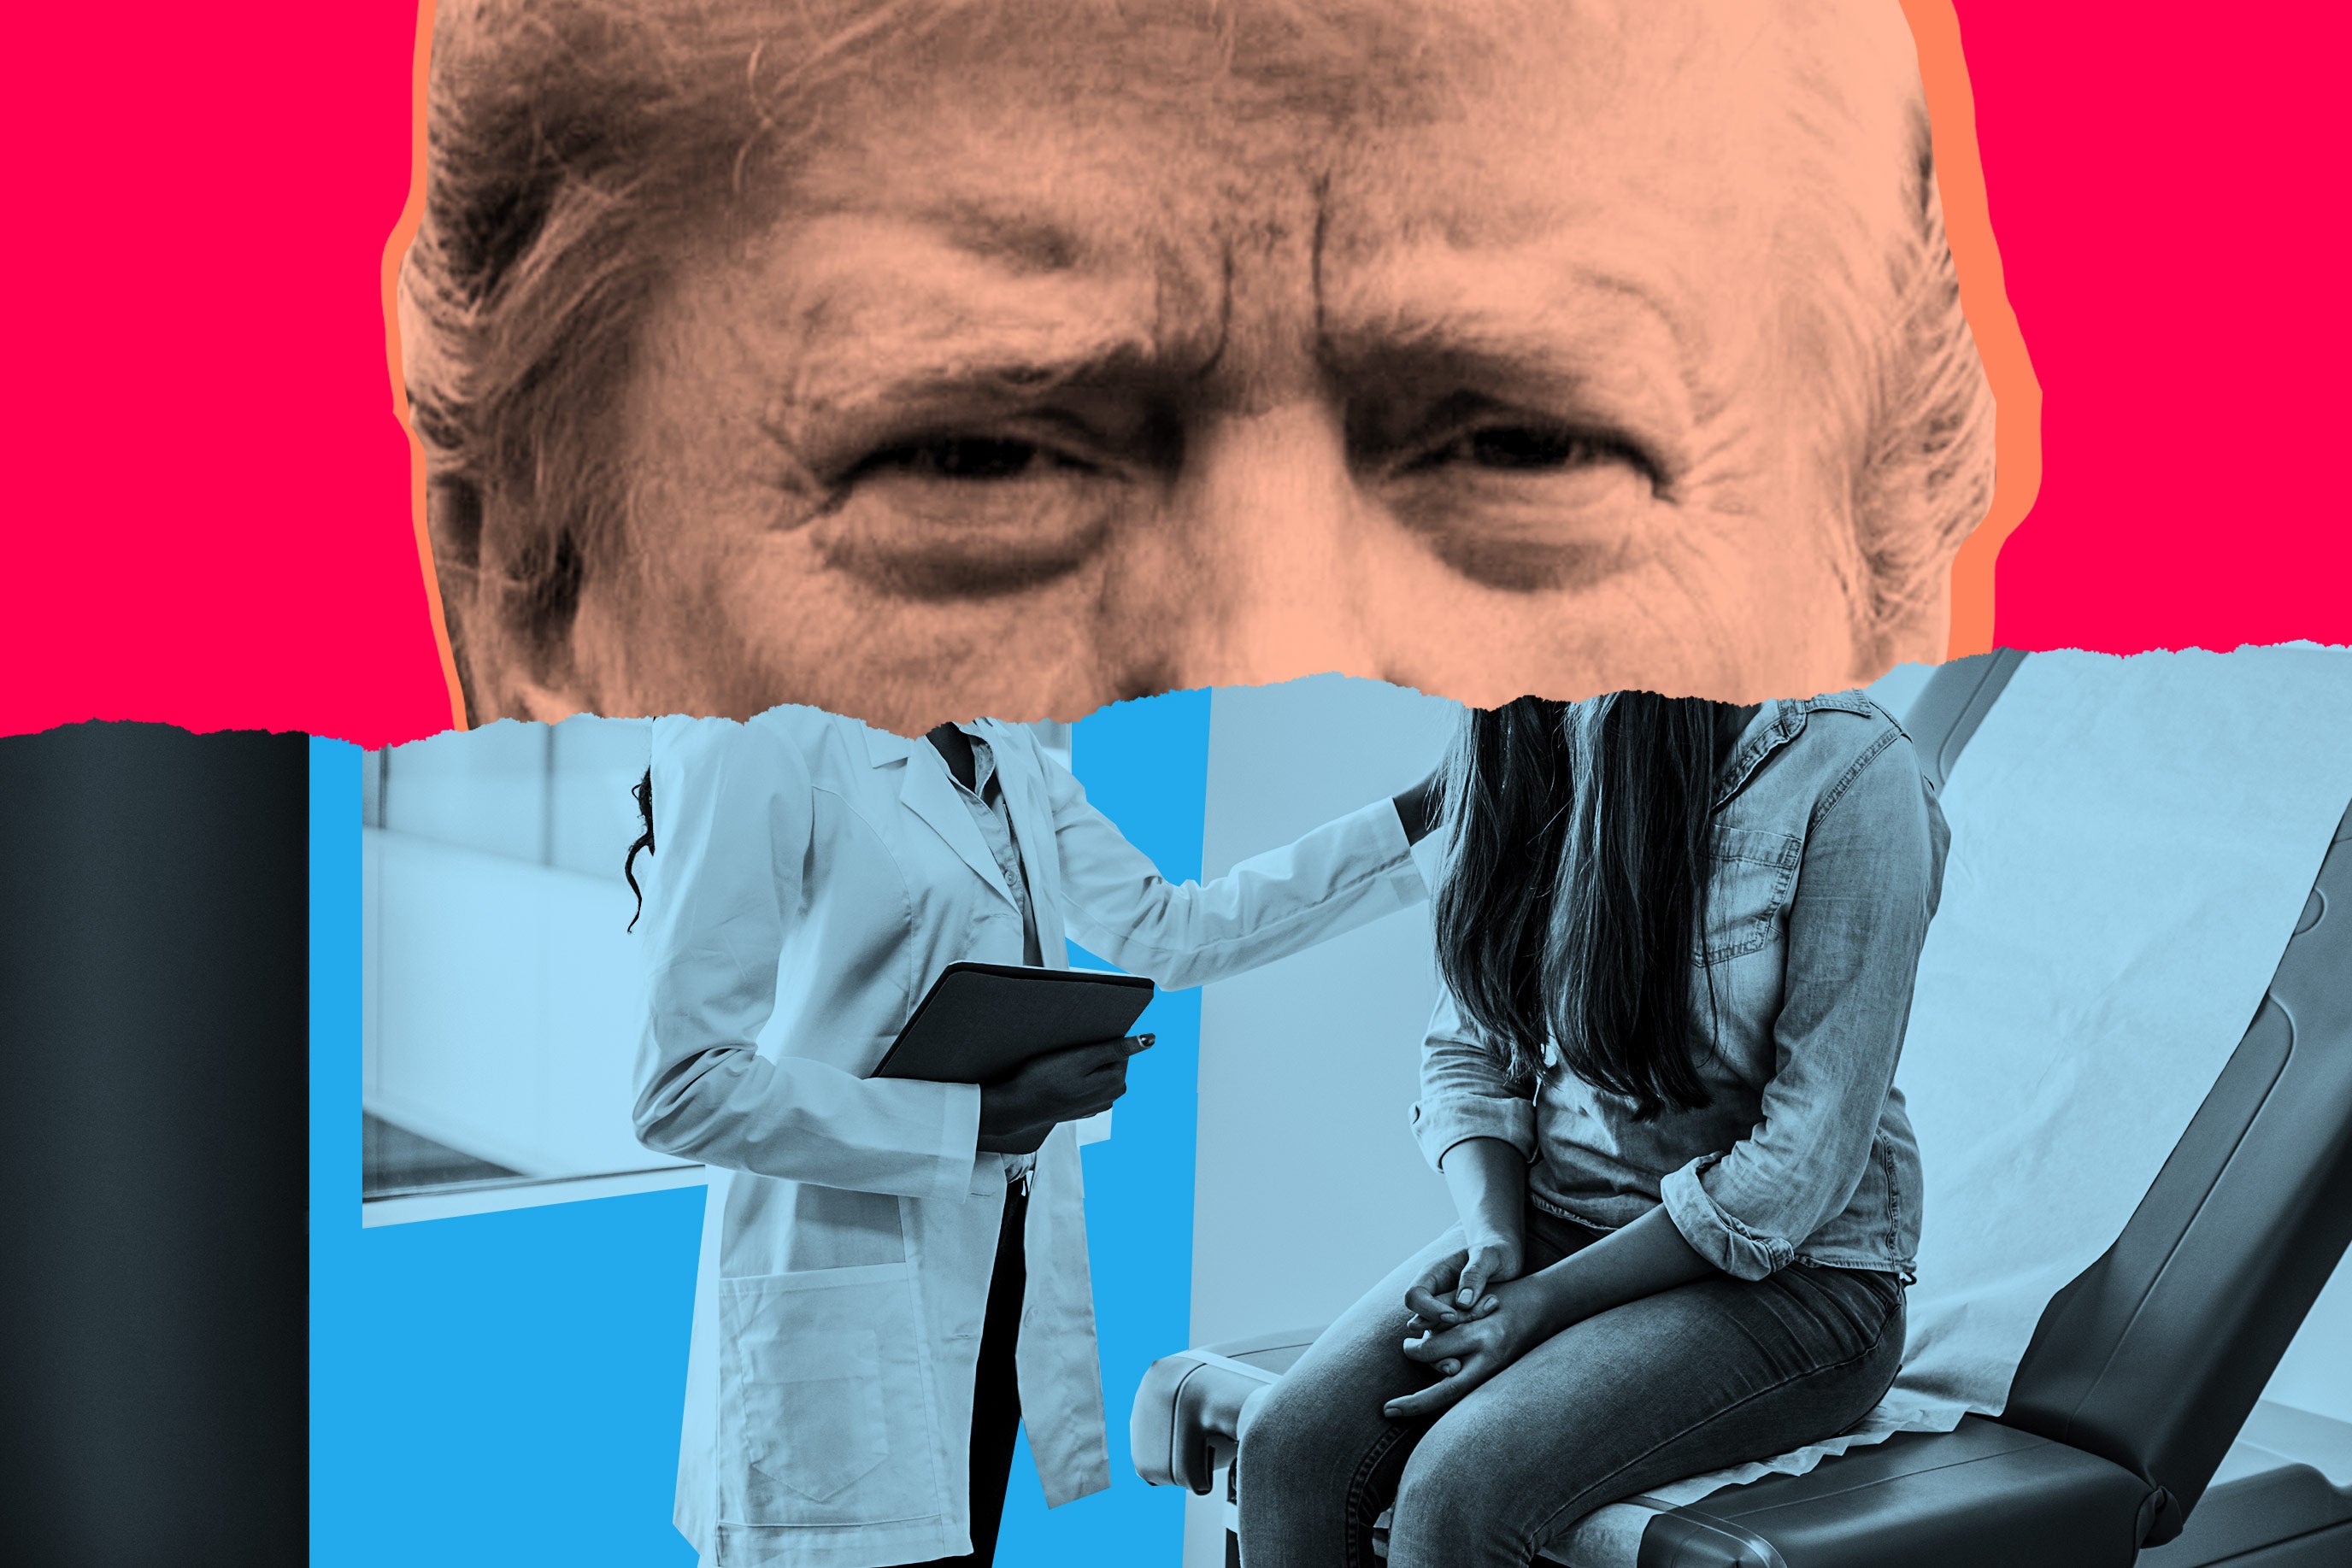 A collage of Trump looming over a doctor's office.